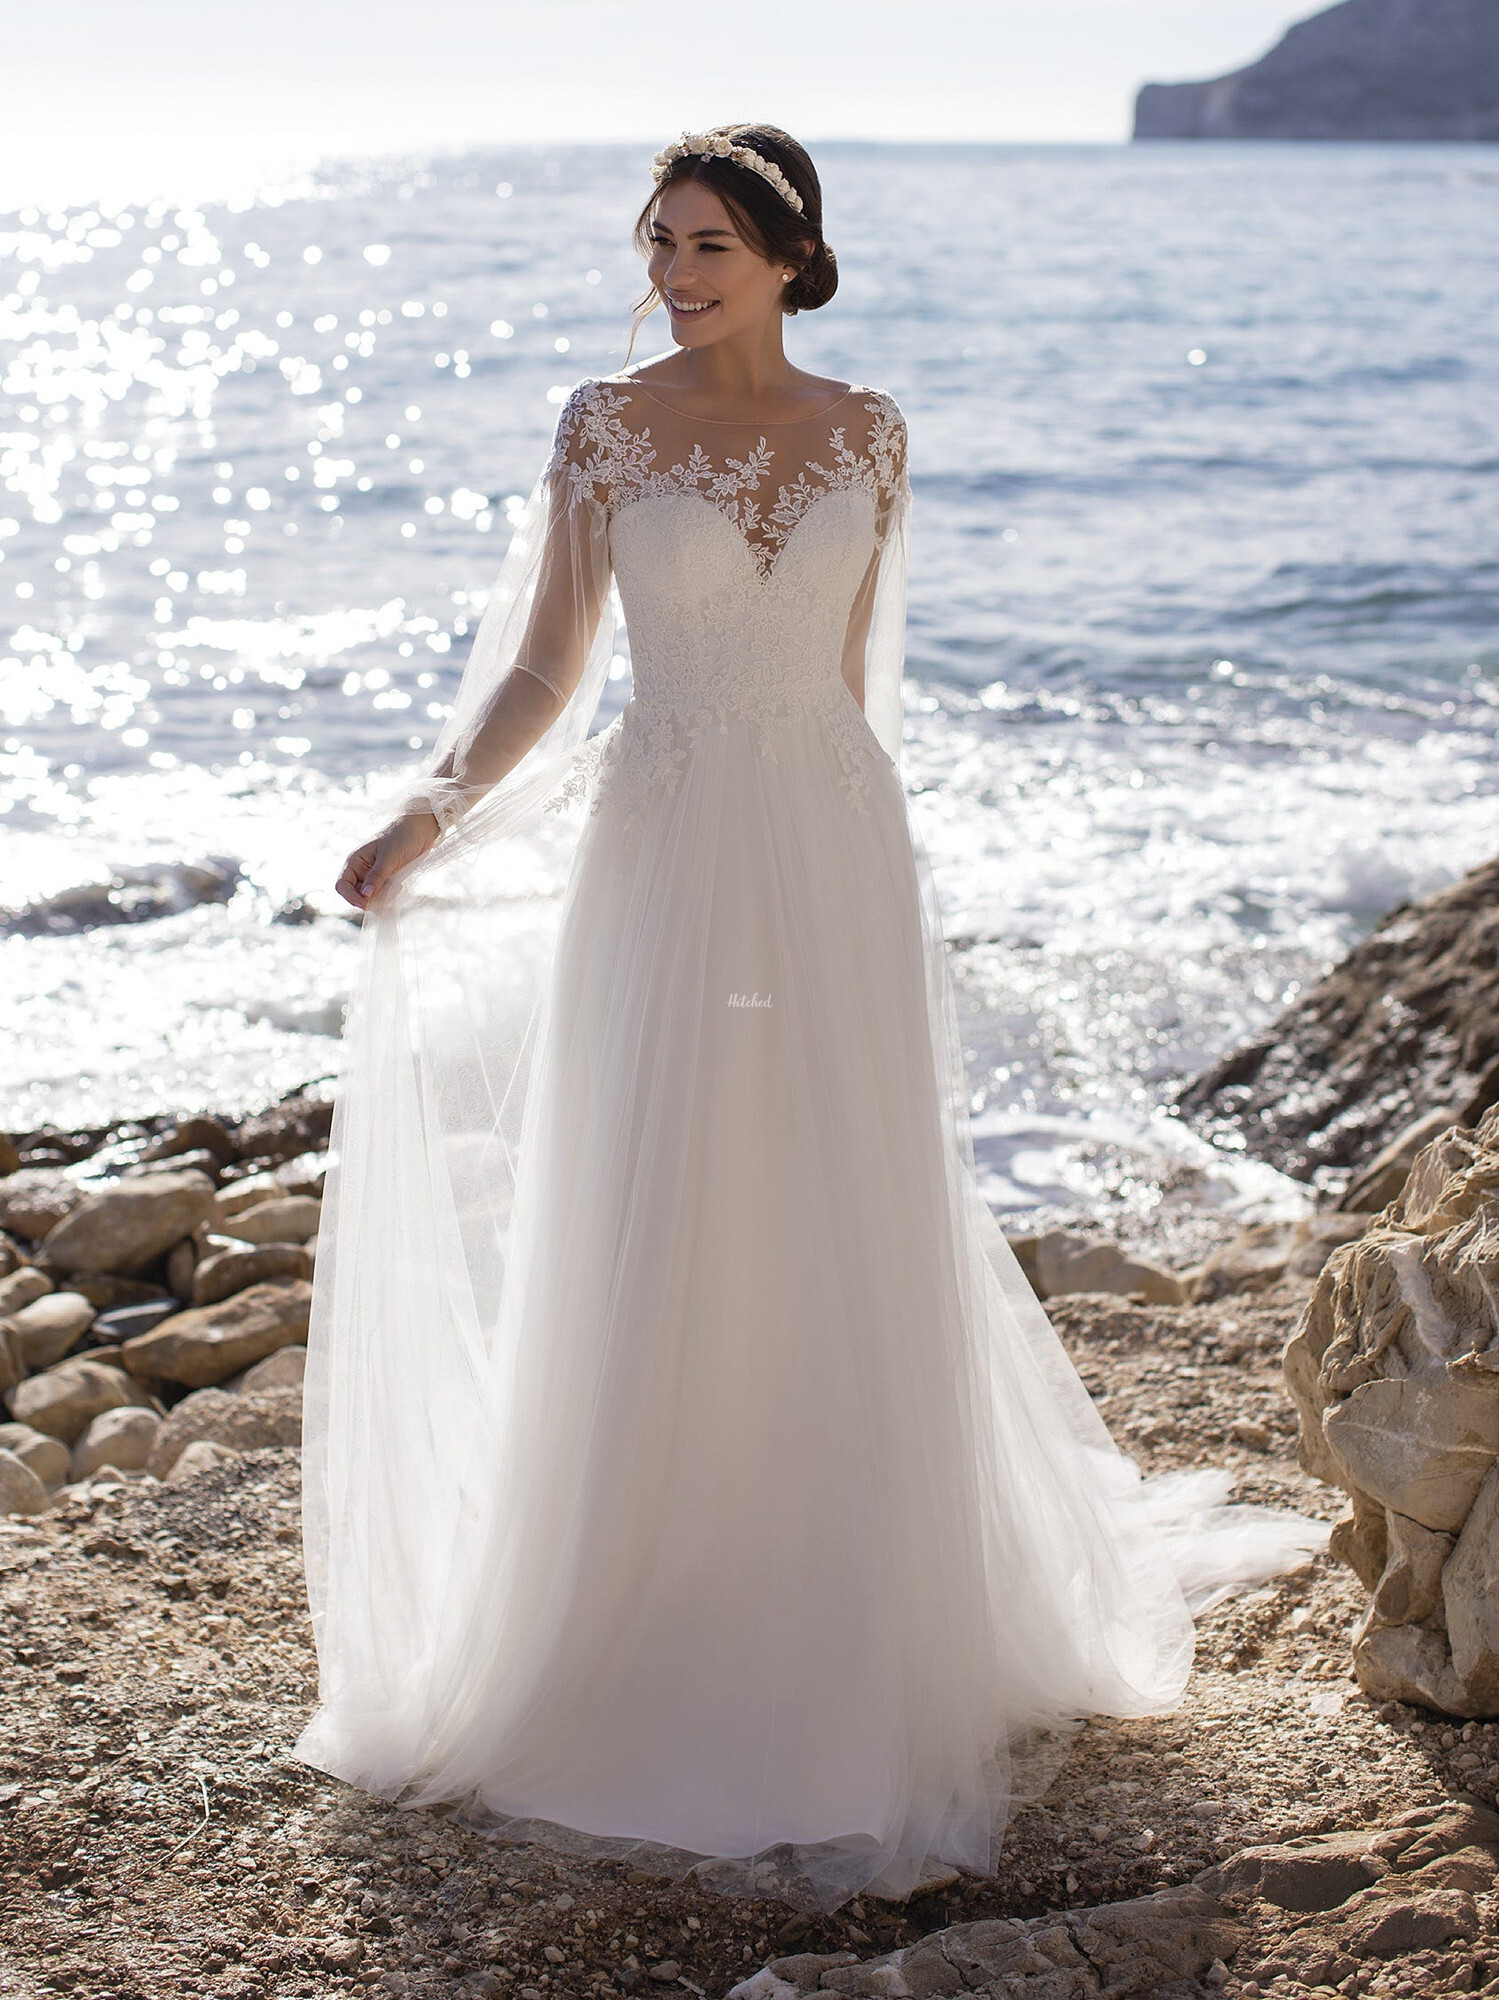 willow Wedding Dress from White One - hitched.co.uk